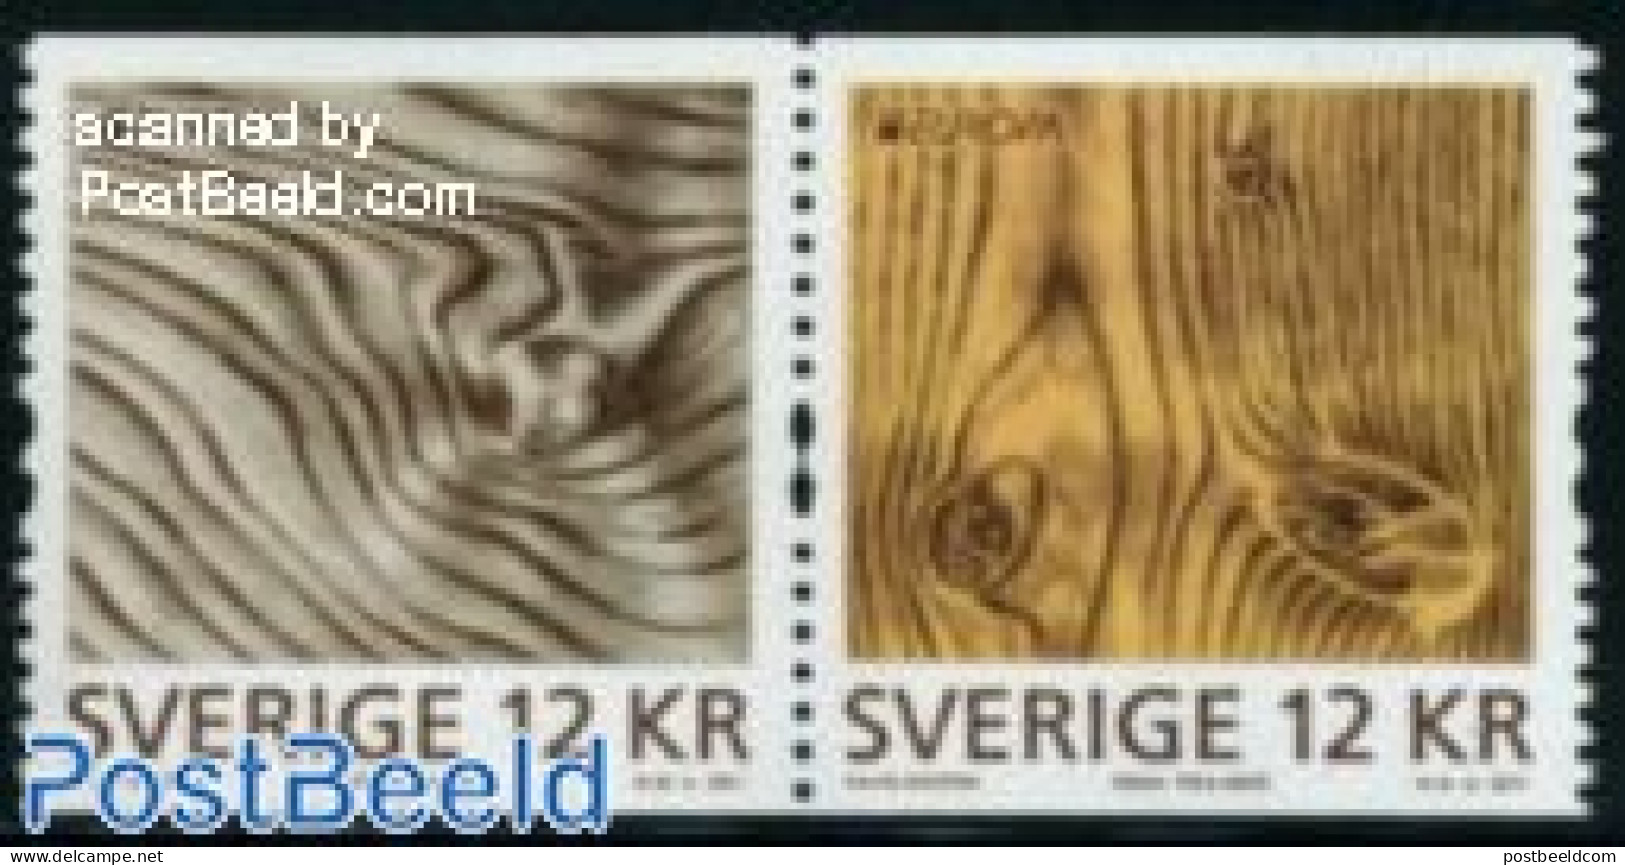 Sweden 2011 Europa, Forests 2v [:] (sequence May Vary), Mint NH, History - Nature - Europa (cept) - Trees & Forests - Nuevos